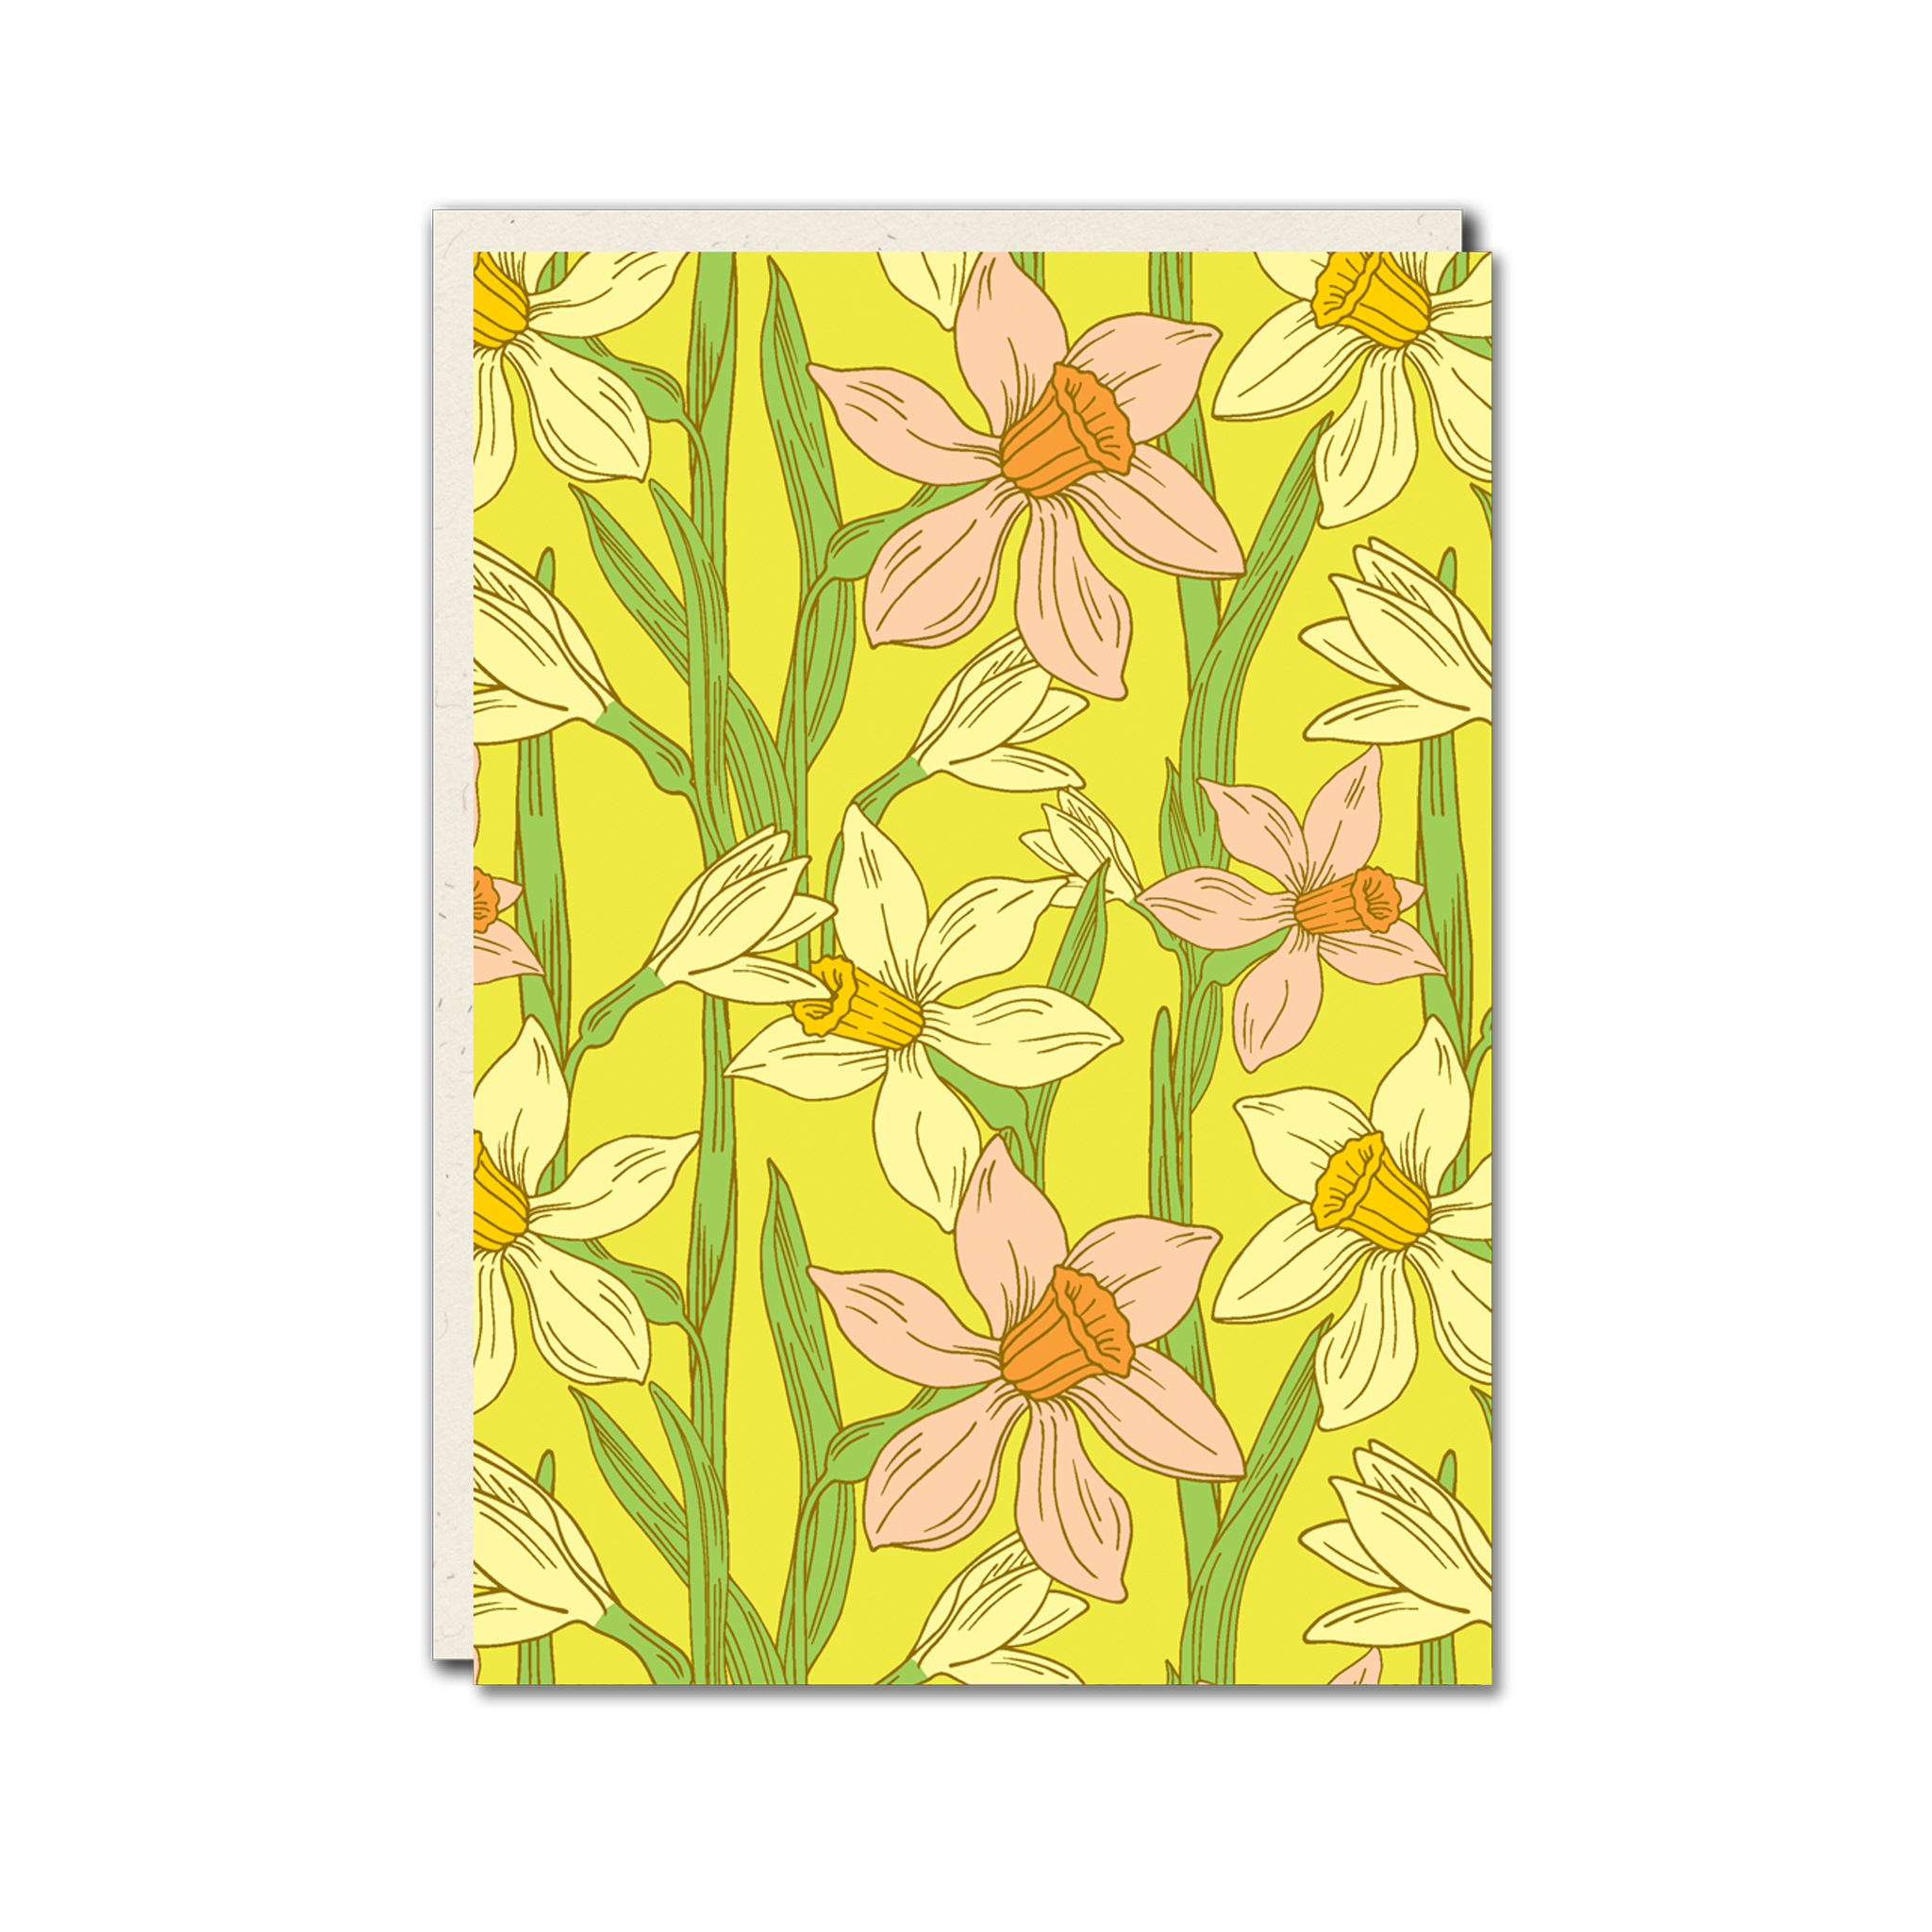 Daffodil patterned greeting card